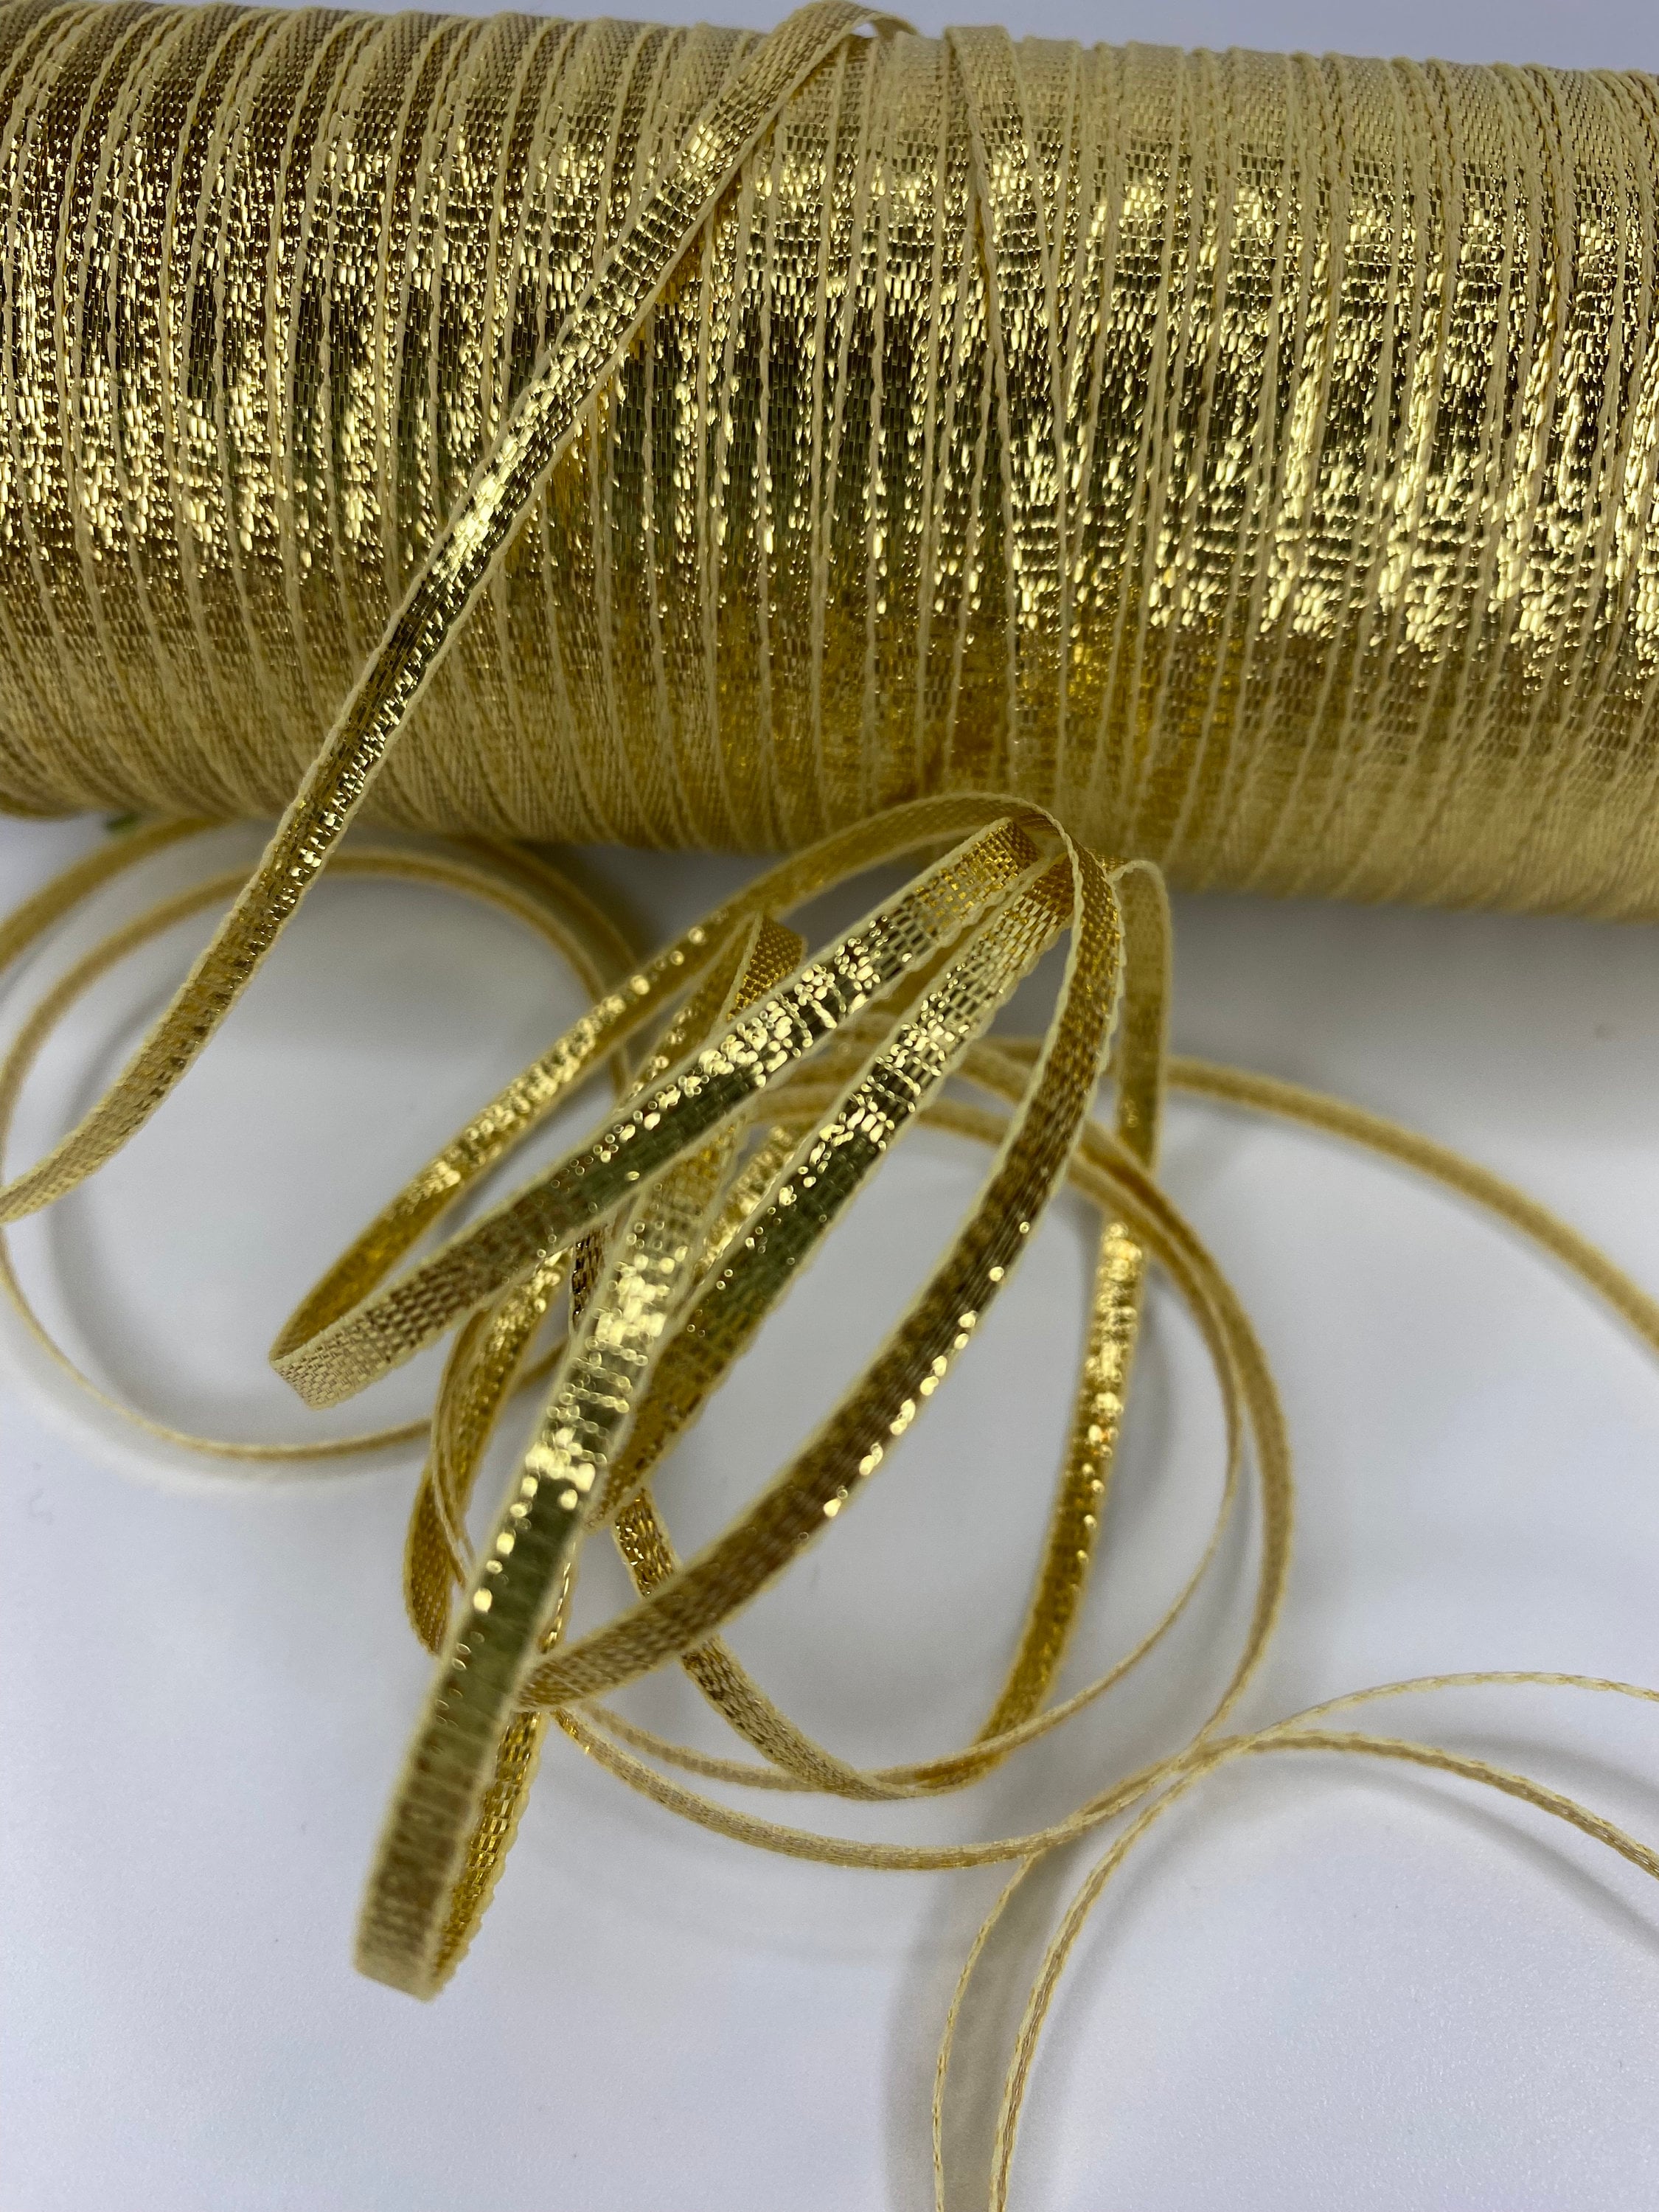  ALTIER White & Gold Metallic Ribbon, Christmas Ribbon Gold, Gold  Ribbon for Gift Wrapping, Christmas Decoration, Christmas Tree Bows,  Wreaths, Crafts, Holidays (2.5 inch x 25 Yards x 1 Roll)